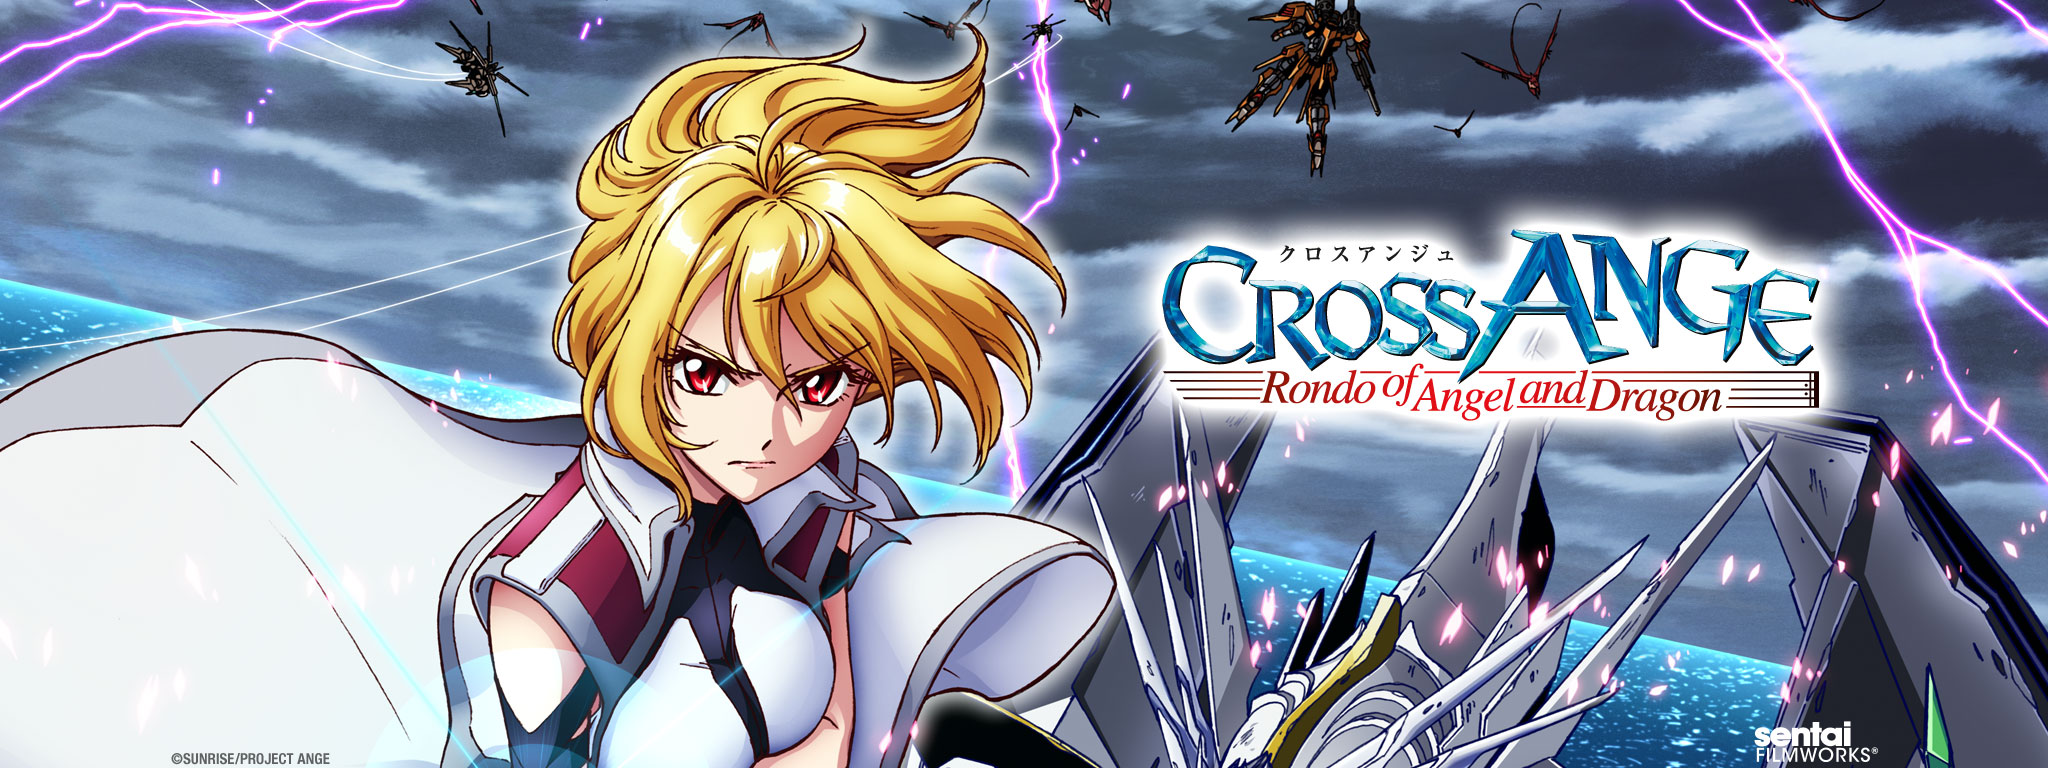 Title Art for Cross Ange: Rondo of Angel and Dragon